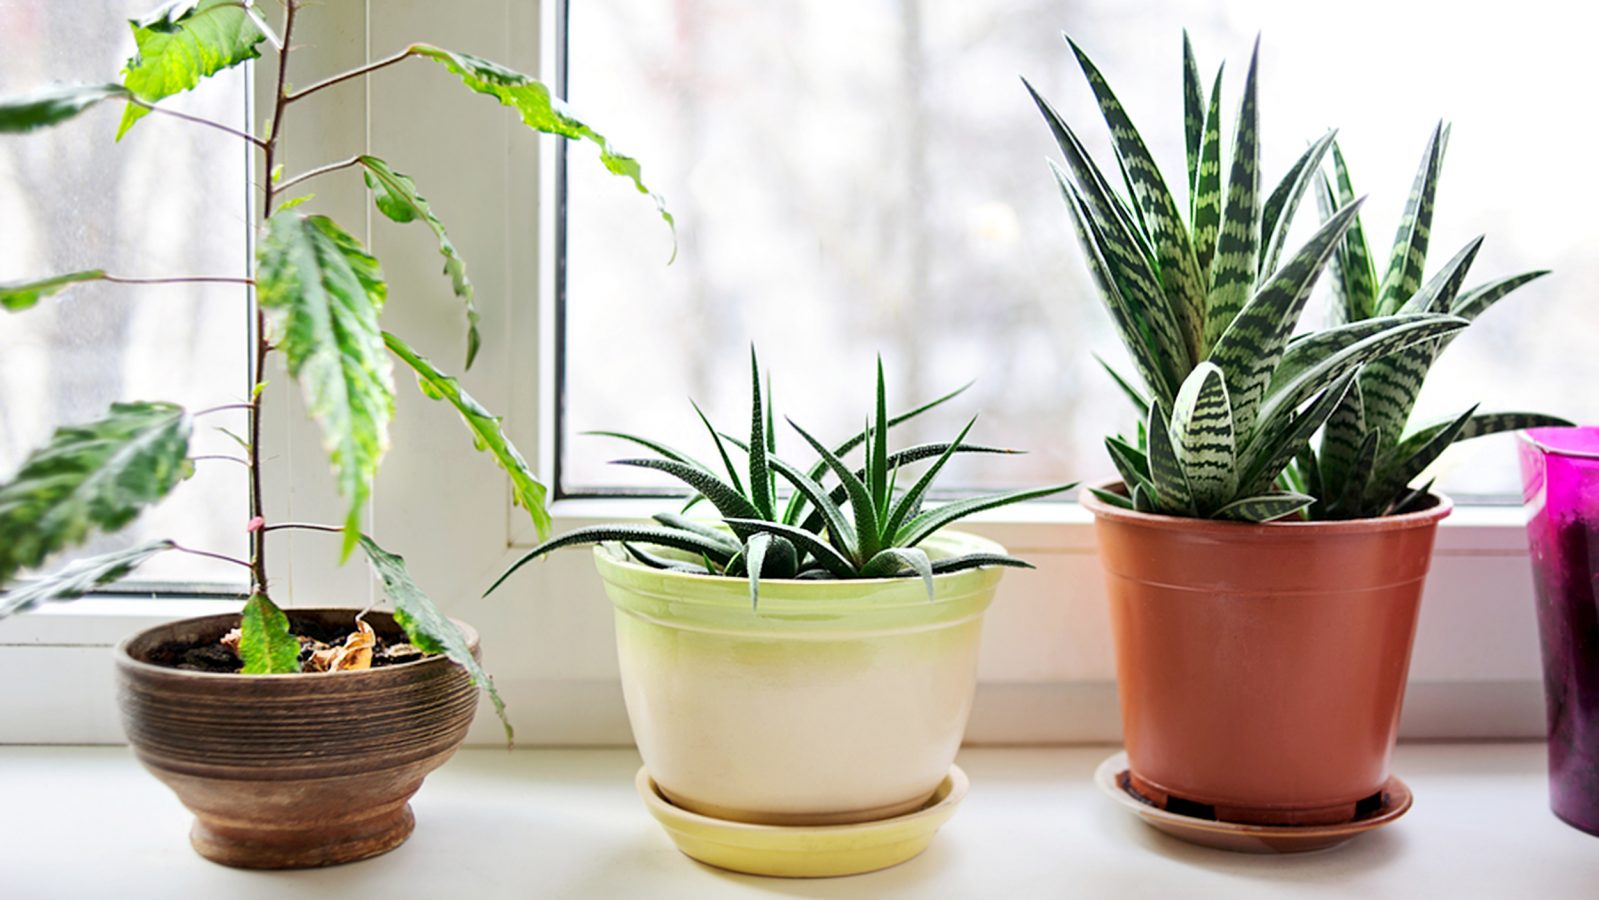 Prove to Be a Trivia Genius by Answering These 20 Random Questions House plants stock image